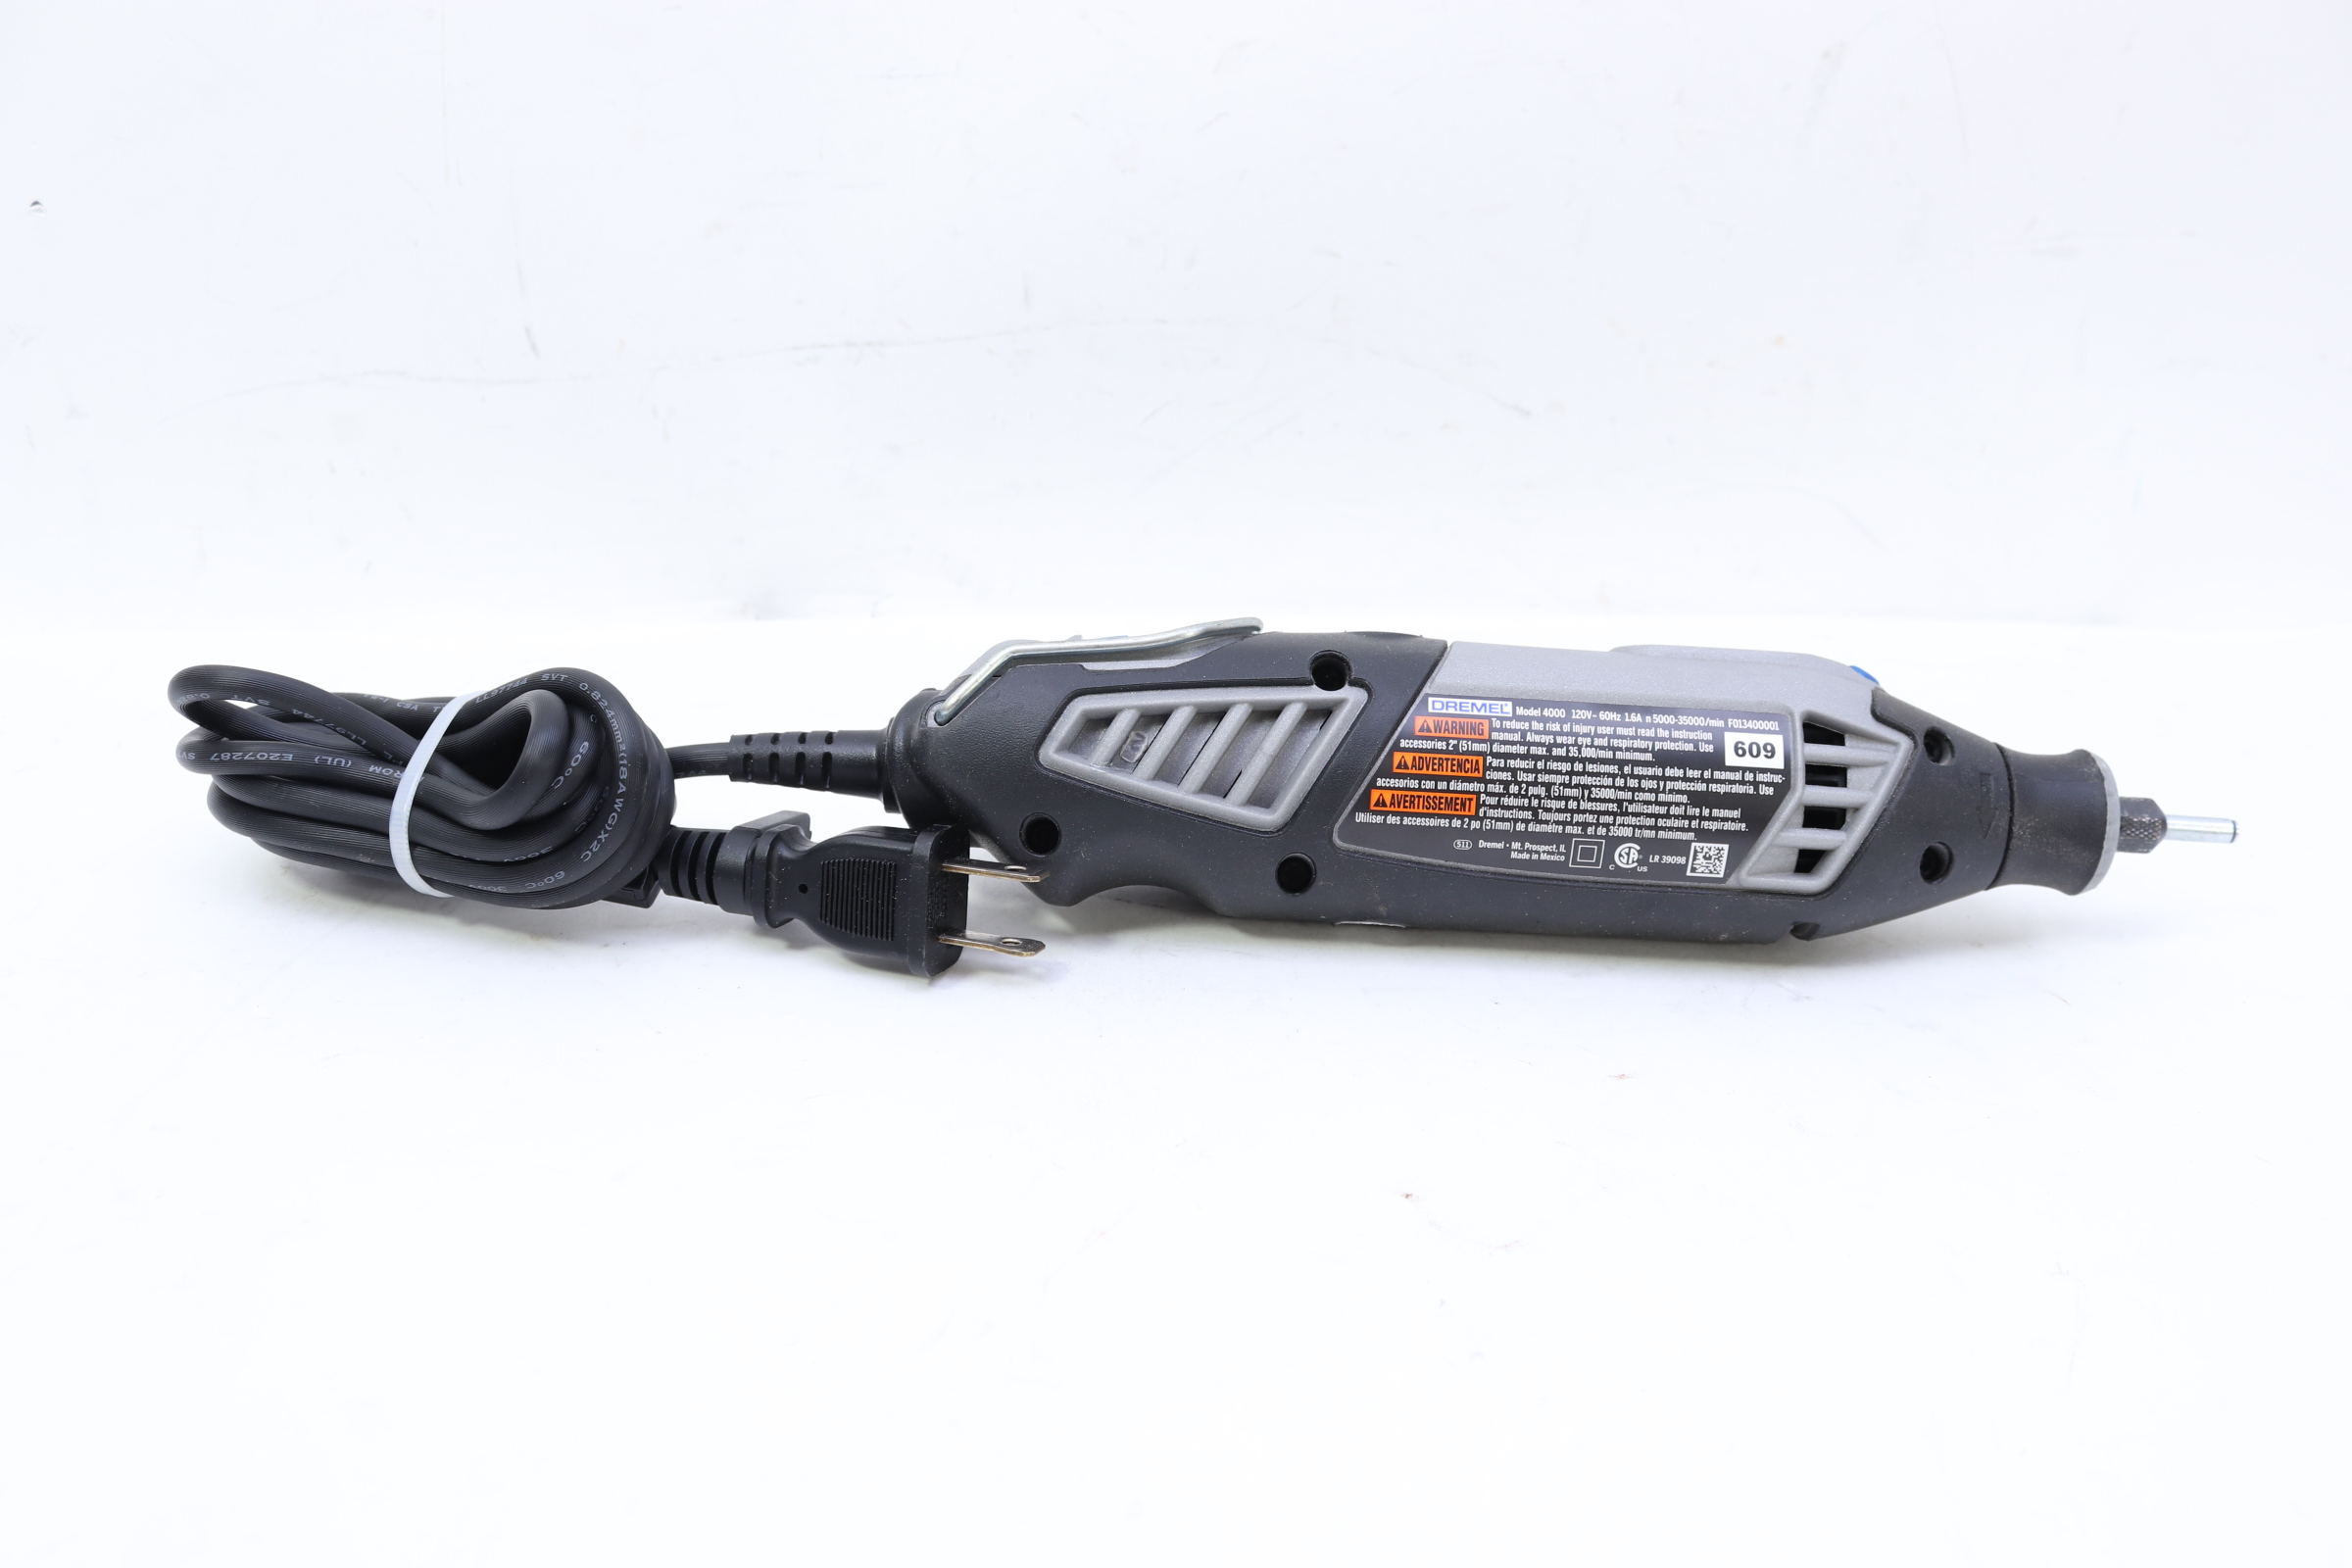 Dremel 4000-4/34 4000 Series 1.6 Amp Variable Speed Corded Rotary